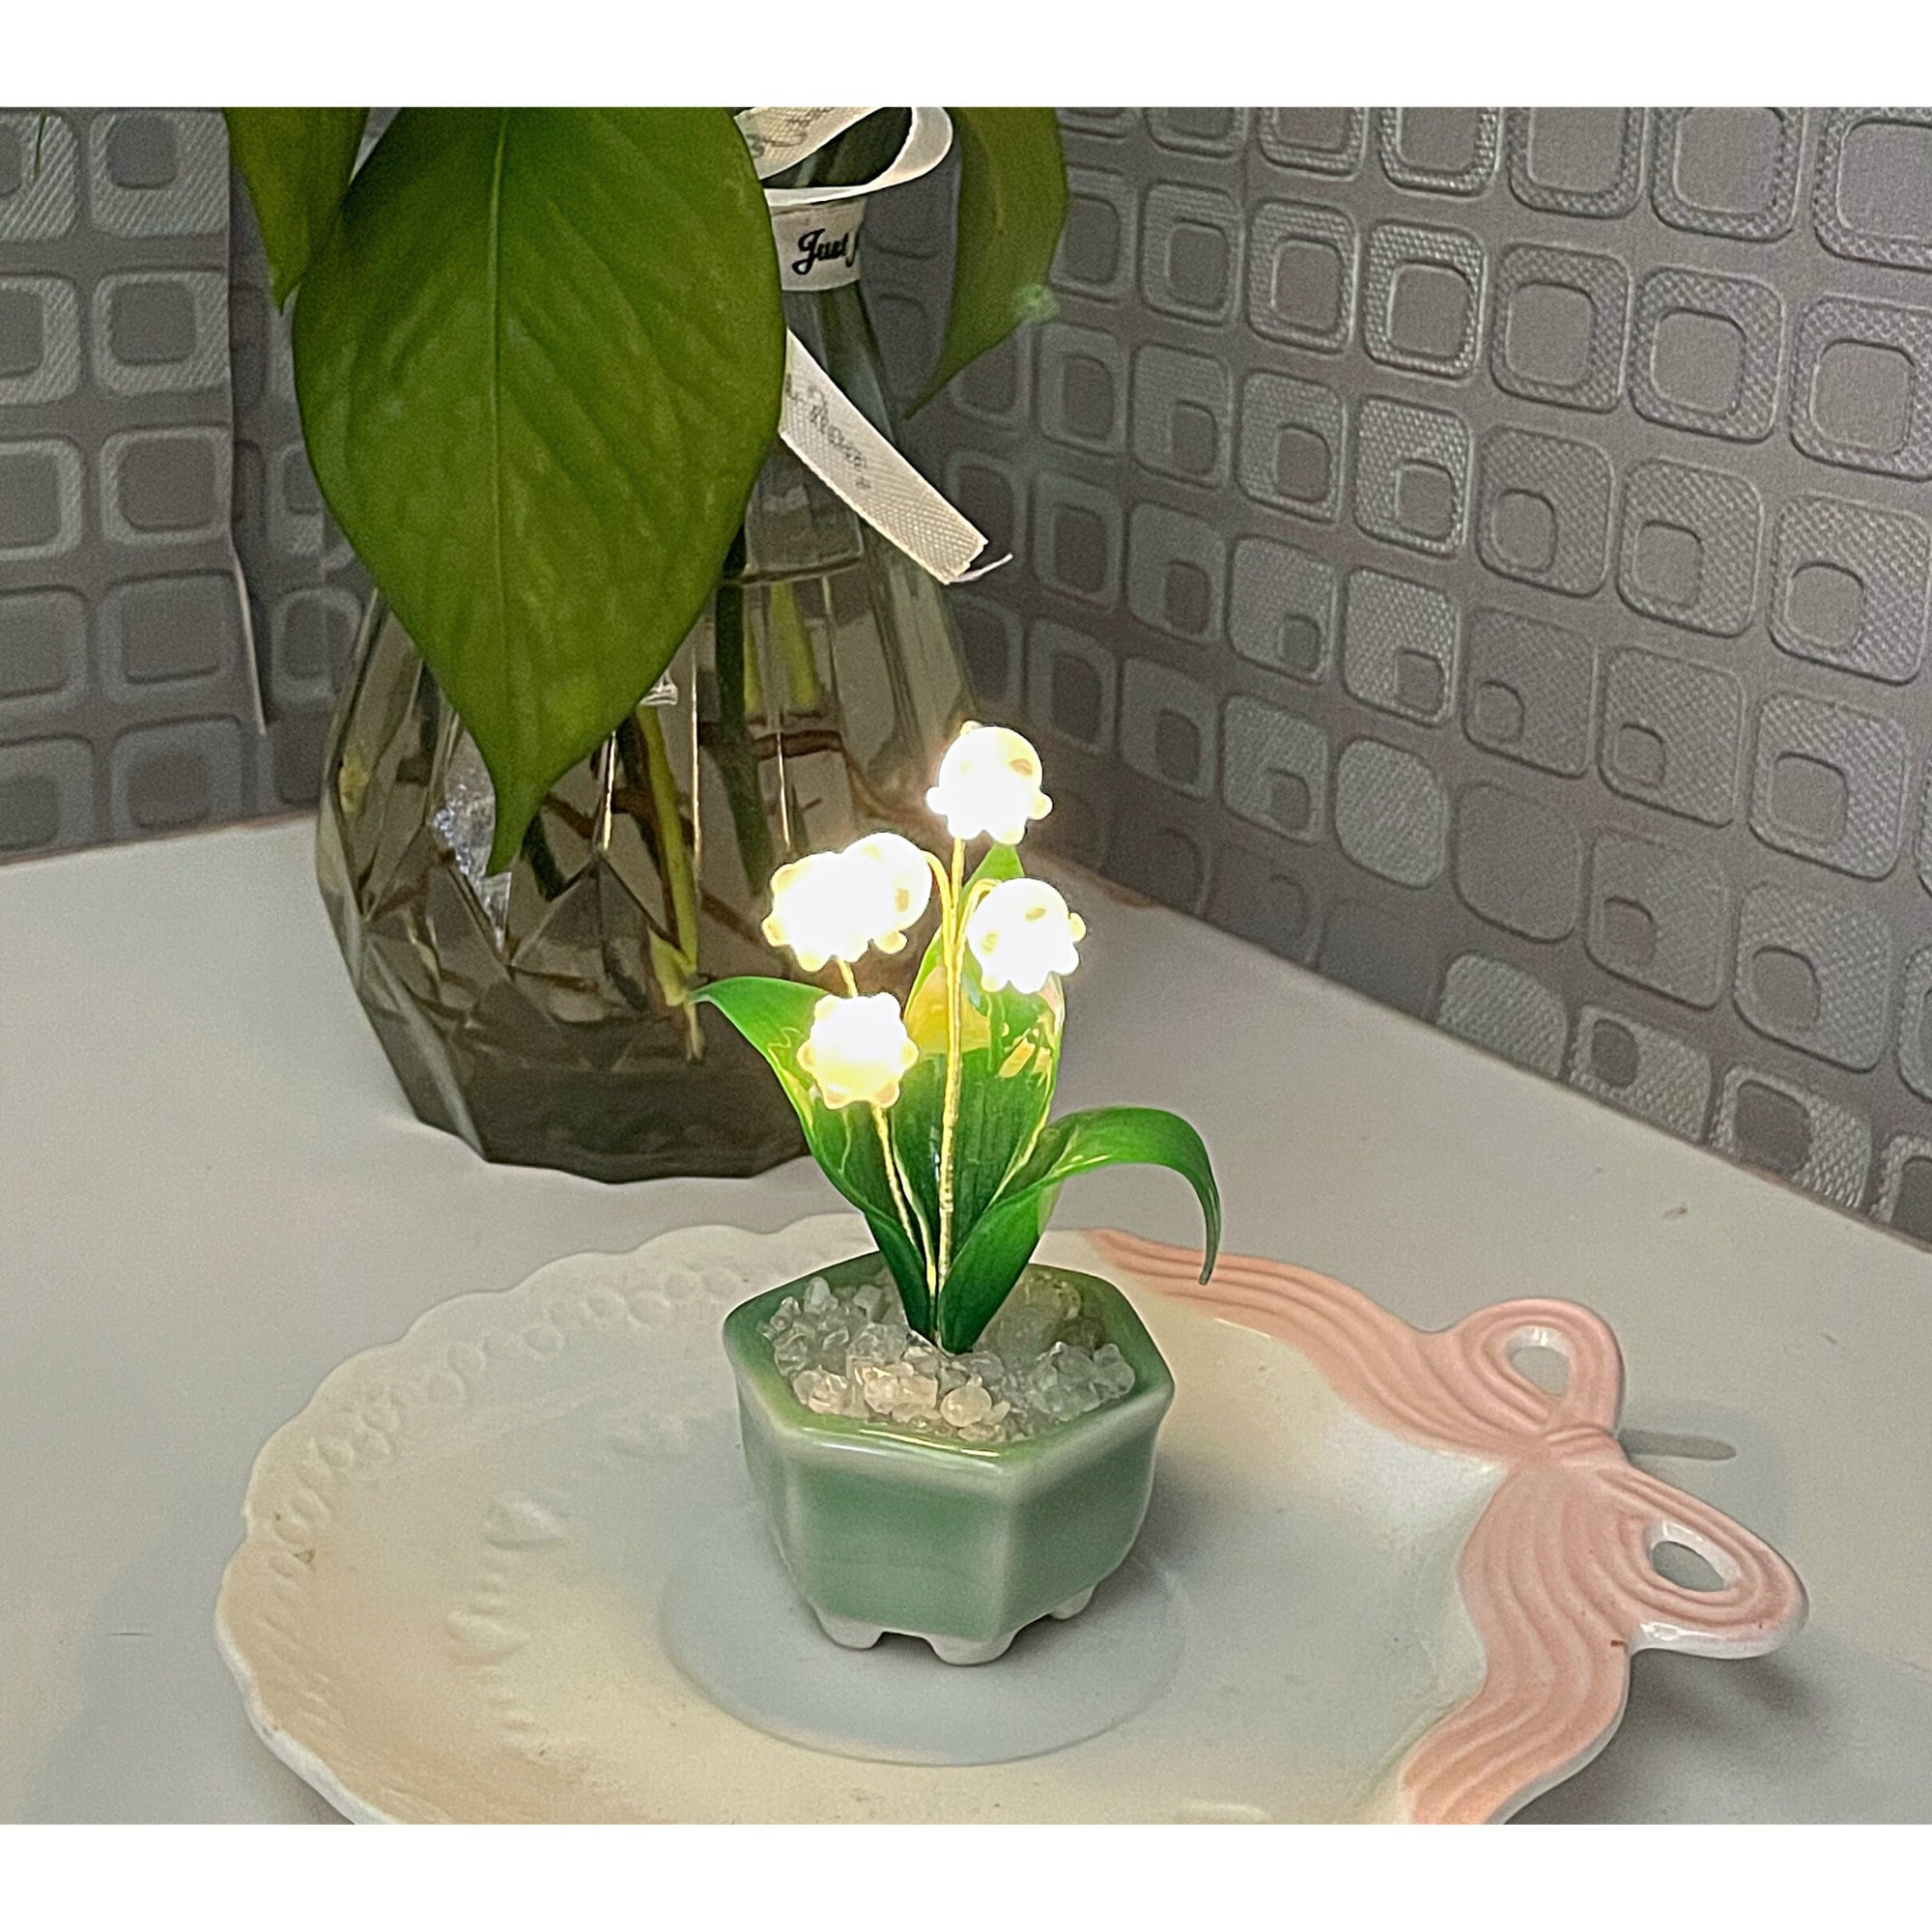 PABIPABI Lily of Valley Night Light, 10pcs Artificial Lily Flowers with  Warm White LED, Battery Powe…See more PABIPABI Lily of Valley Night Light